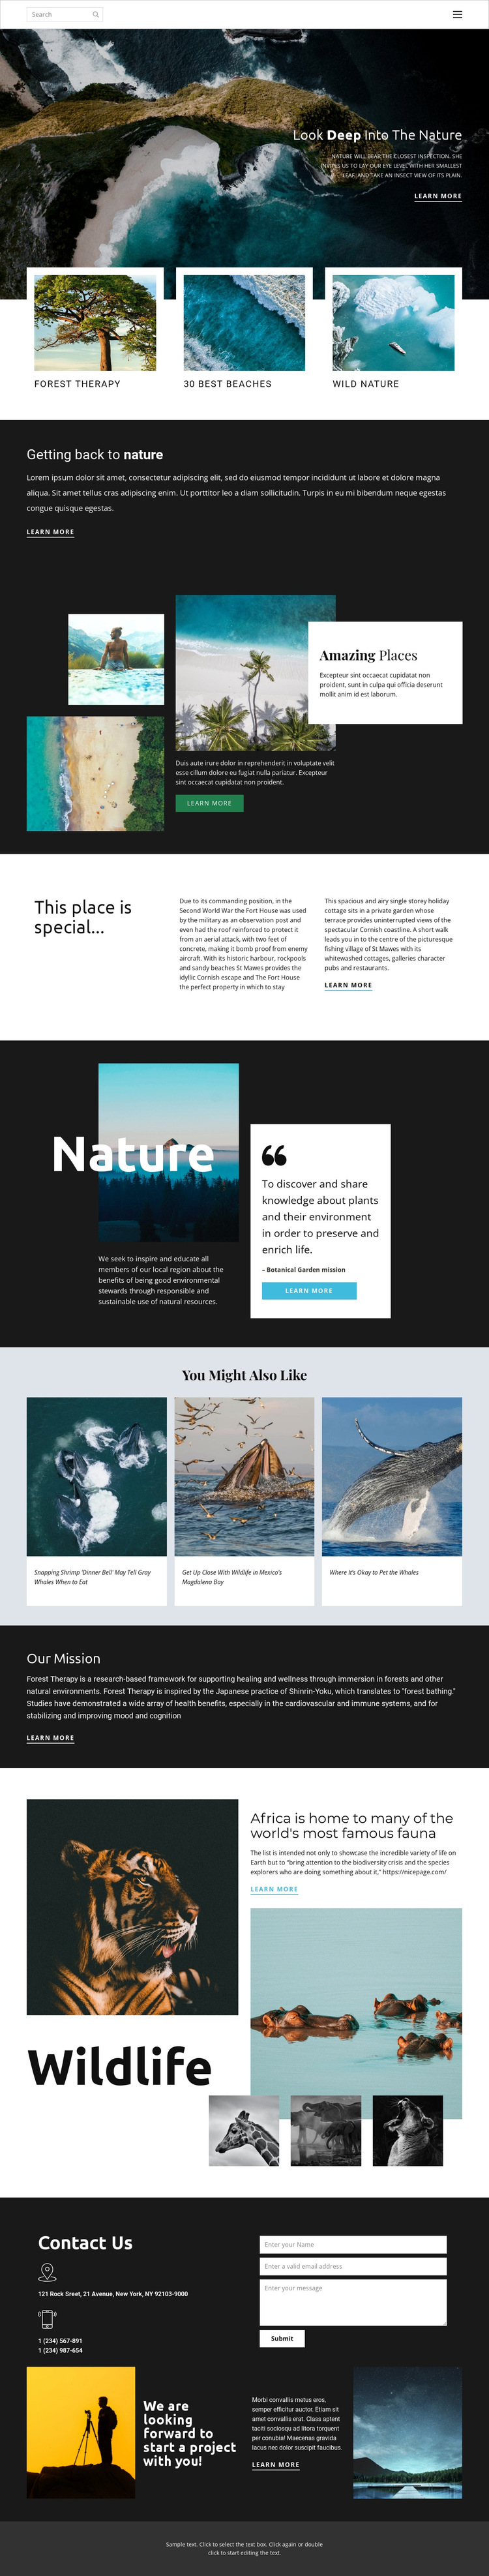 Exploring wildlife and nature HTML5 Template